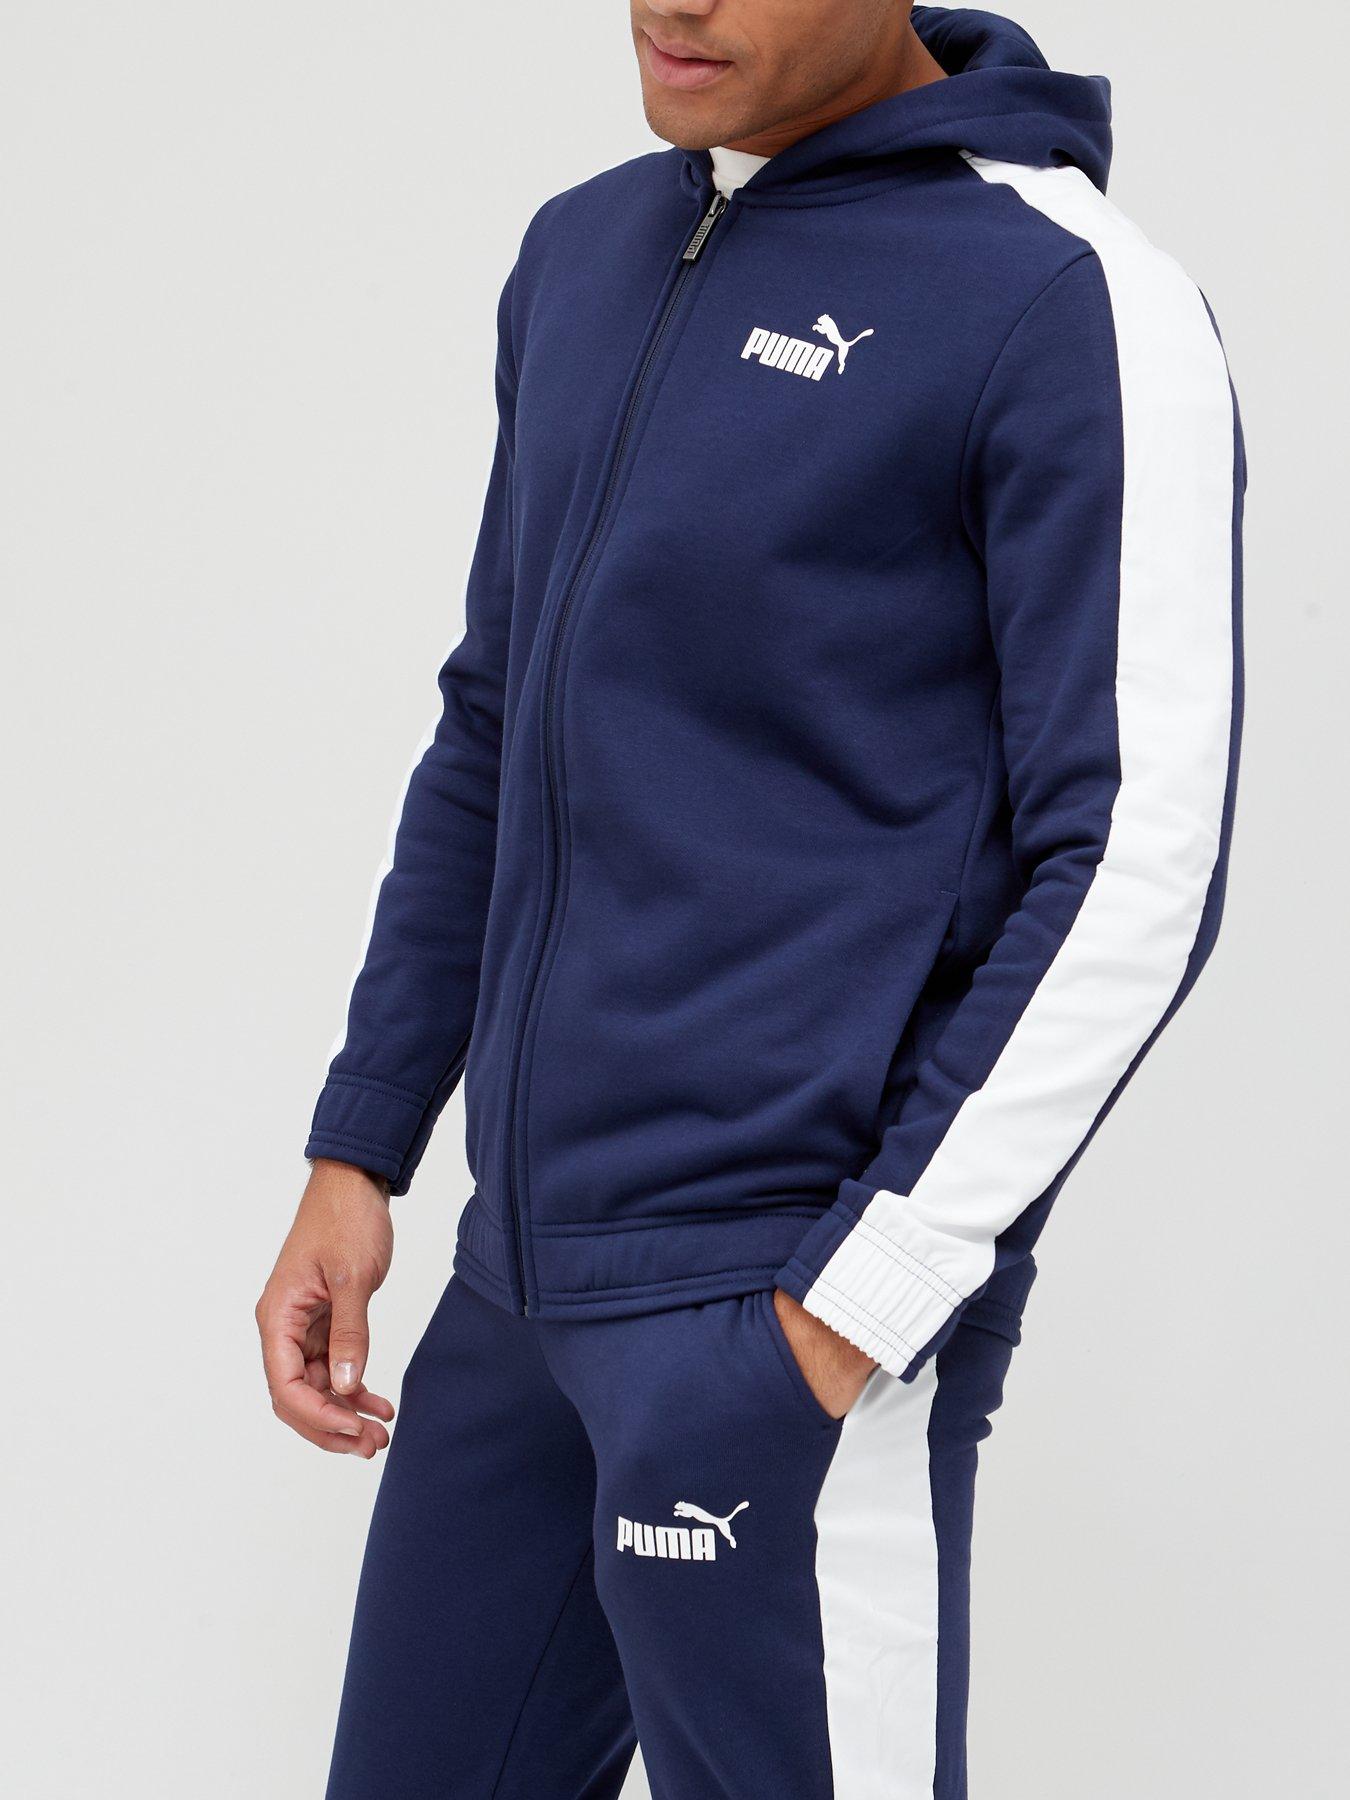 Puma Hooded Sweat Suit - Navy | Very.co.uk